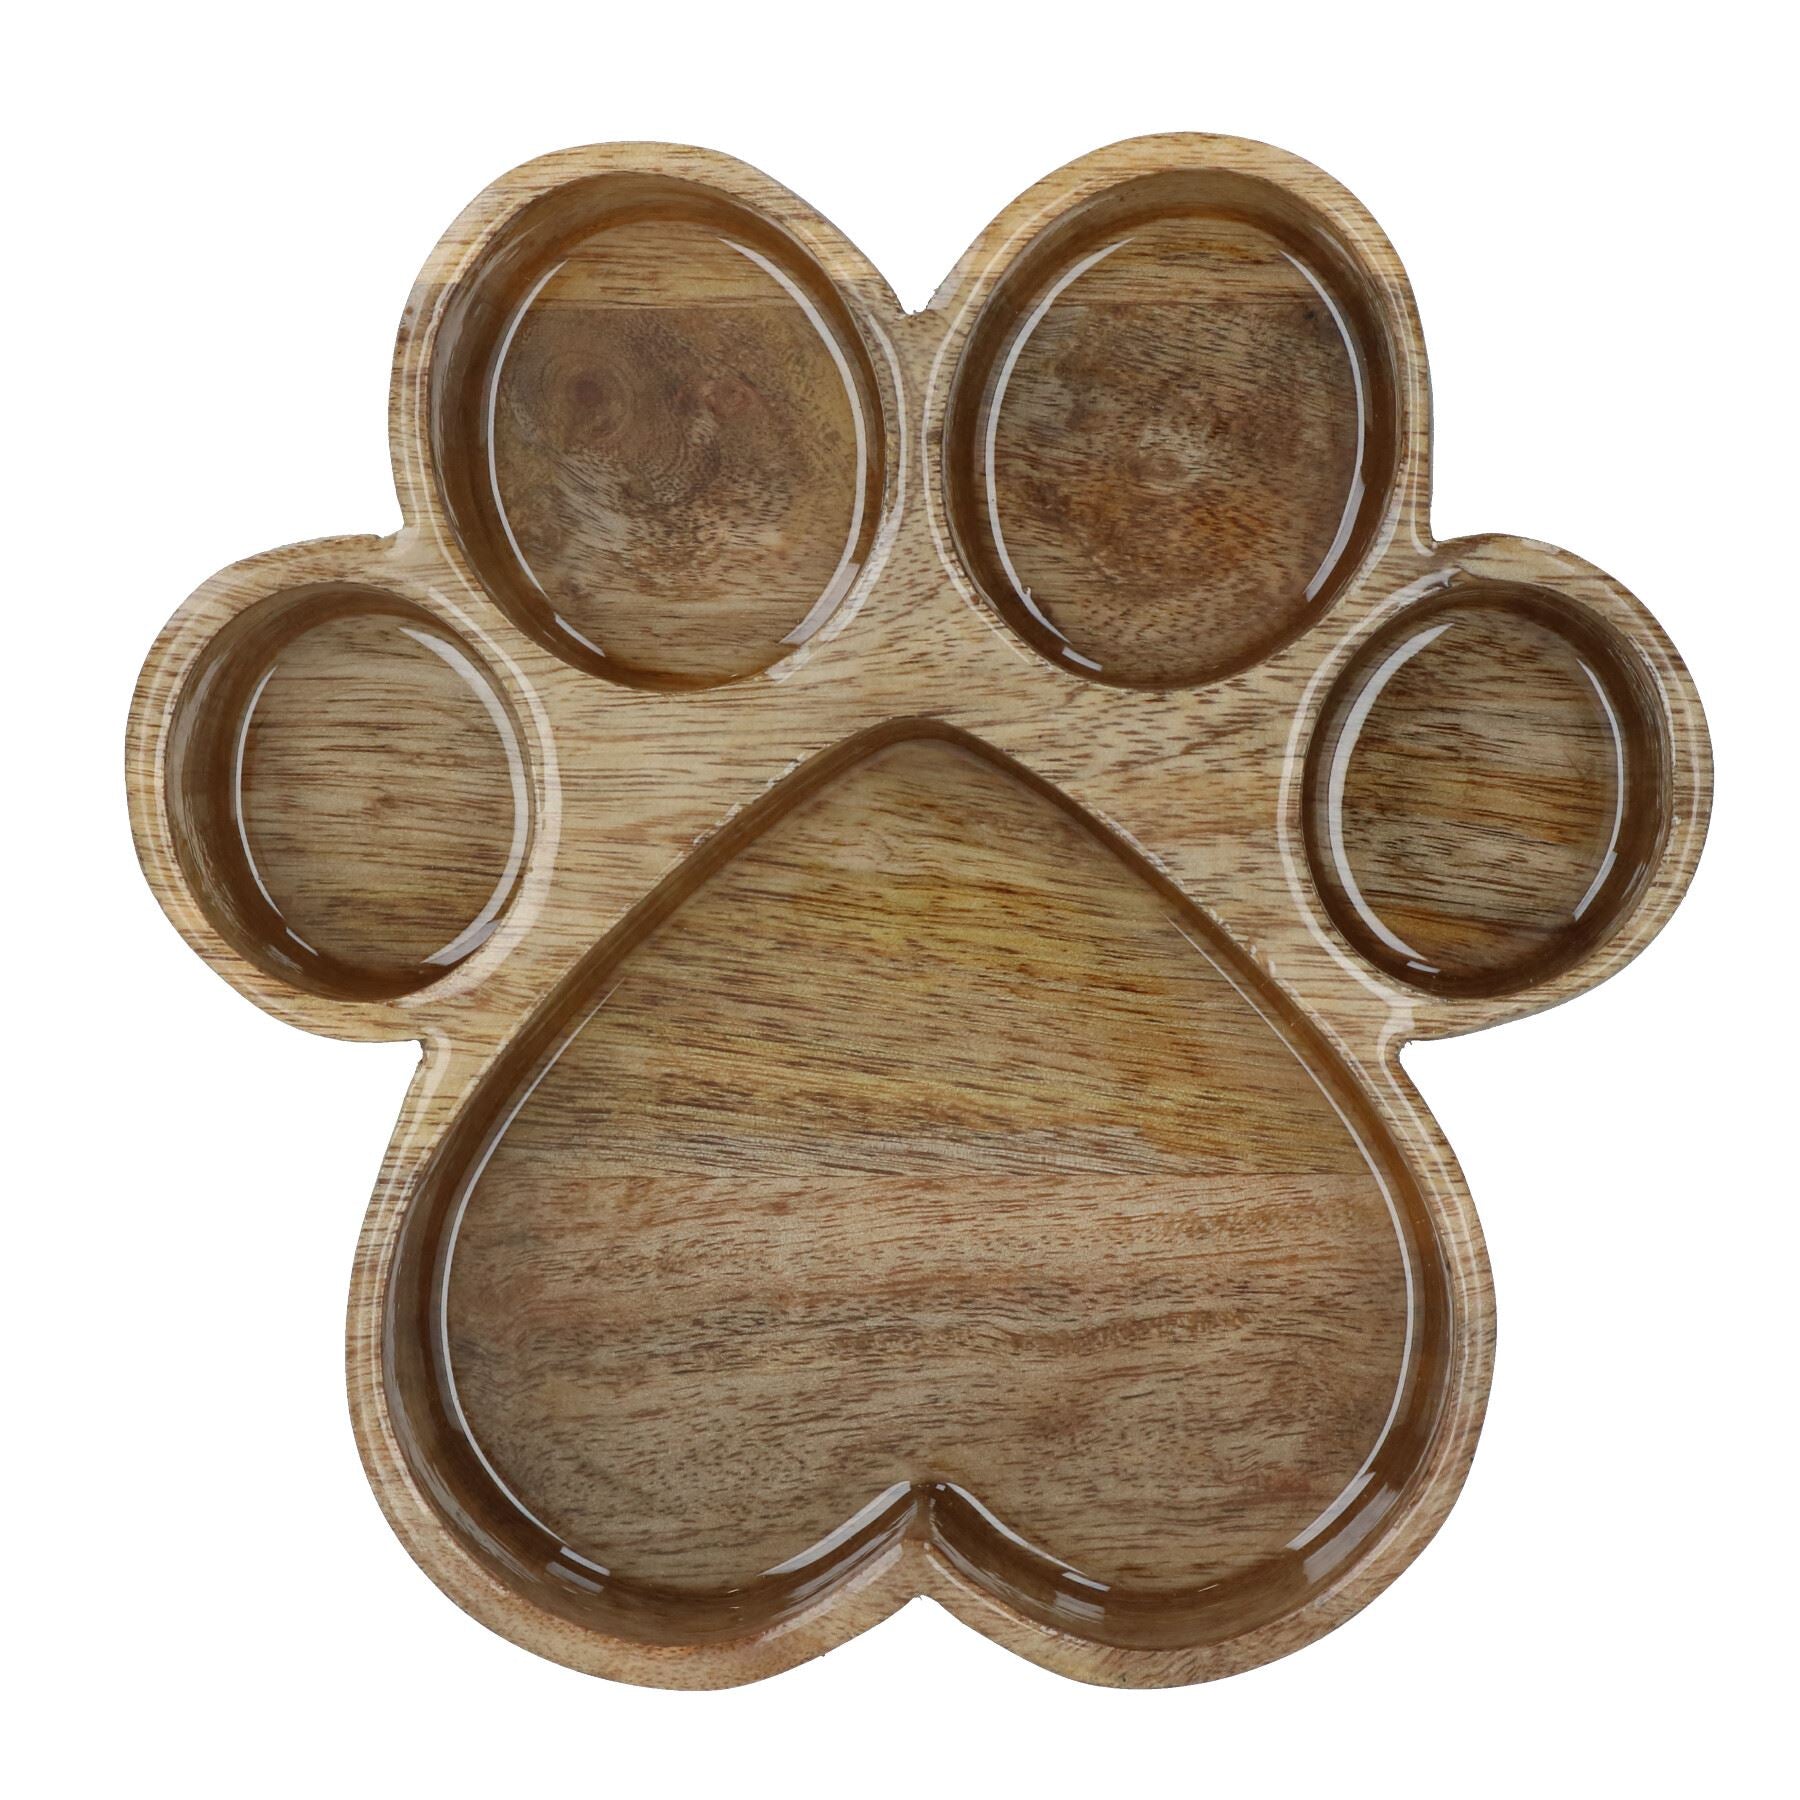 Small Wooden Paw Print Puppy Small Dog Feeding Food Water Bowl 600ml